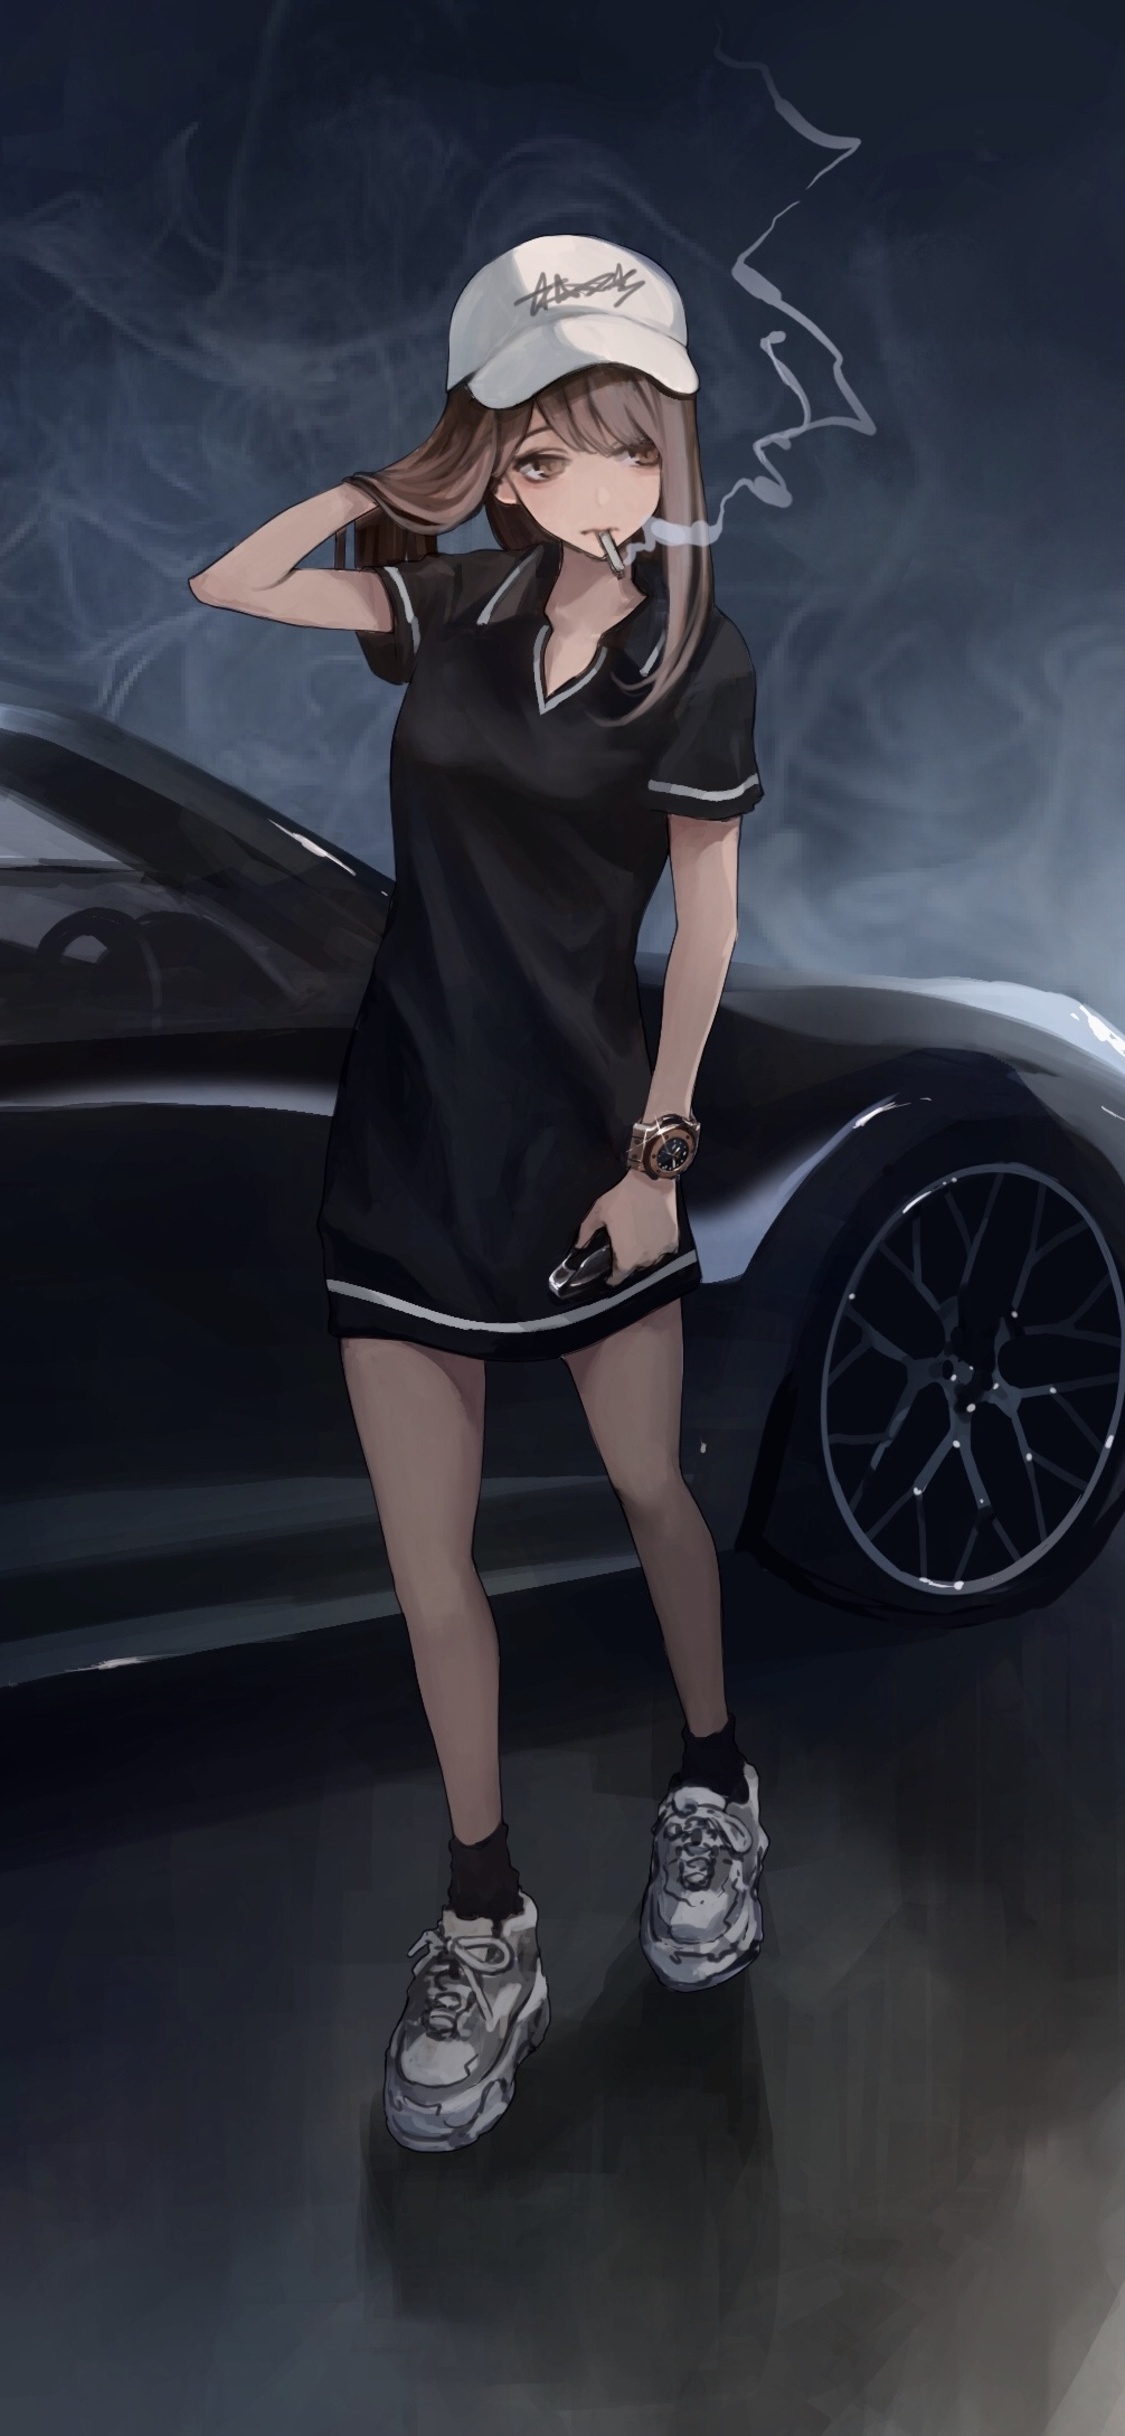 Anime Girl Porsche Smoking 4k iPhone XS, iPhone iPhone X HD 4k Wallpaper, Image, Background, Photo and Picture